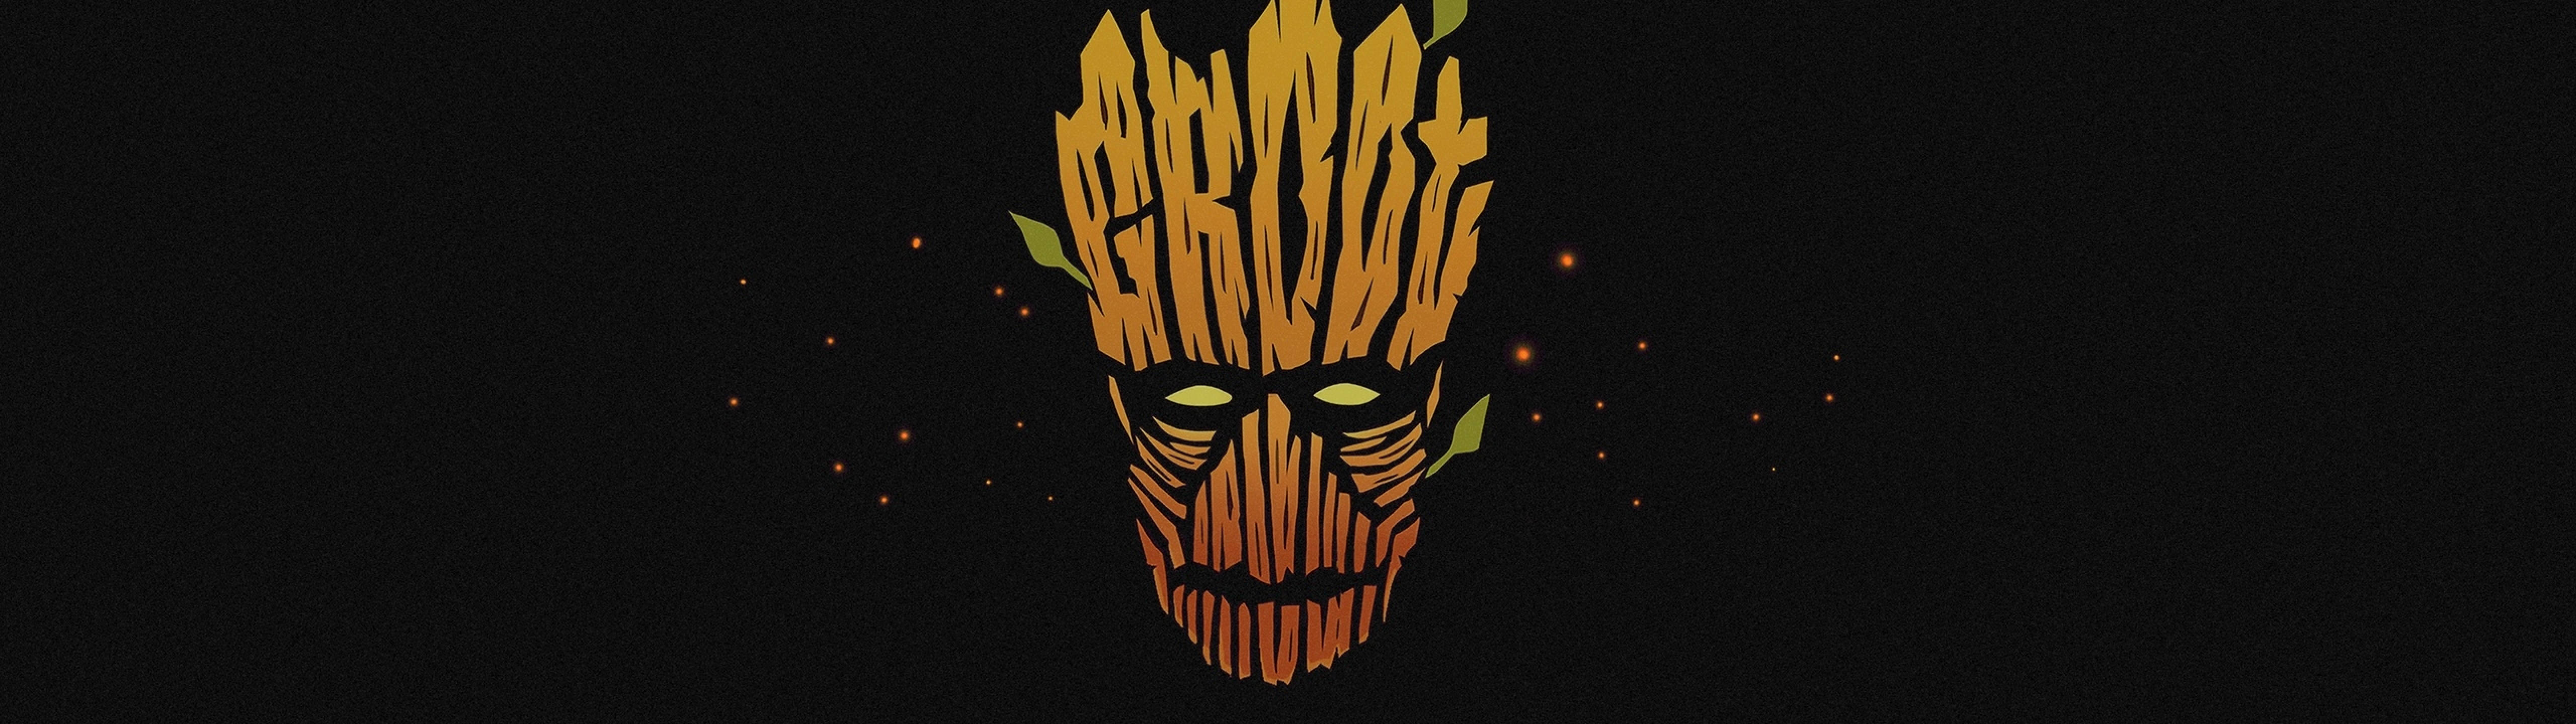 Groot Guardian Of The Galaxy Marvel 5120 X 1440